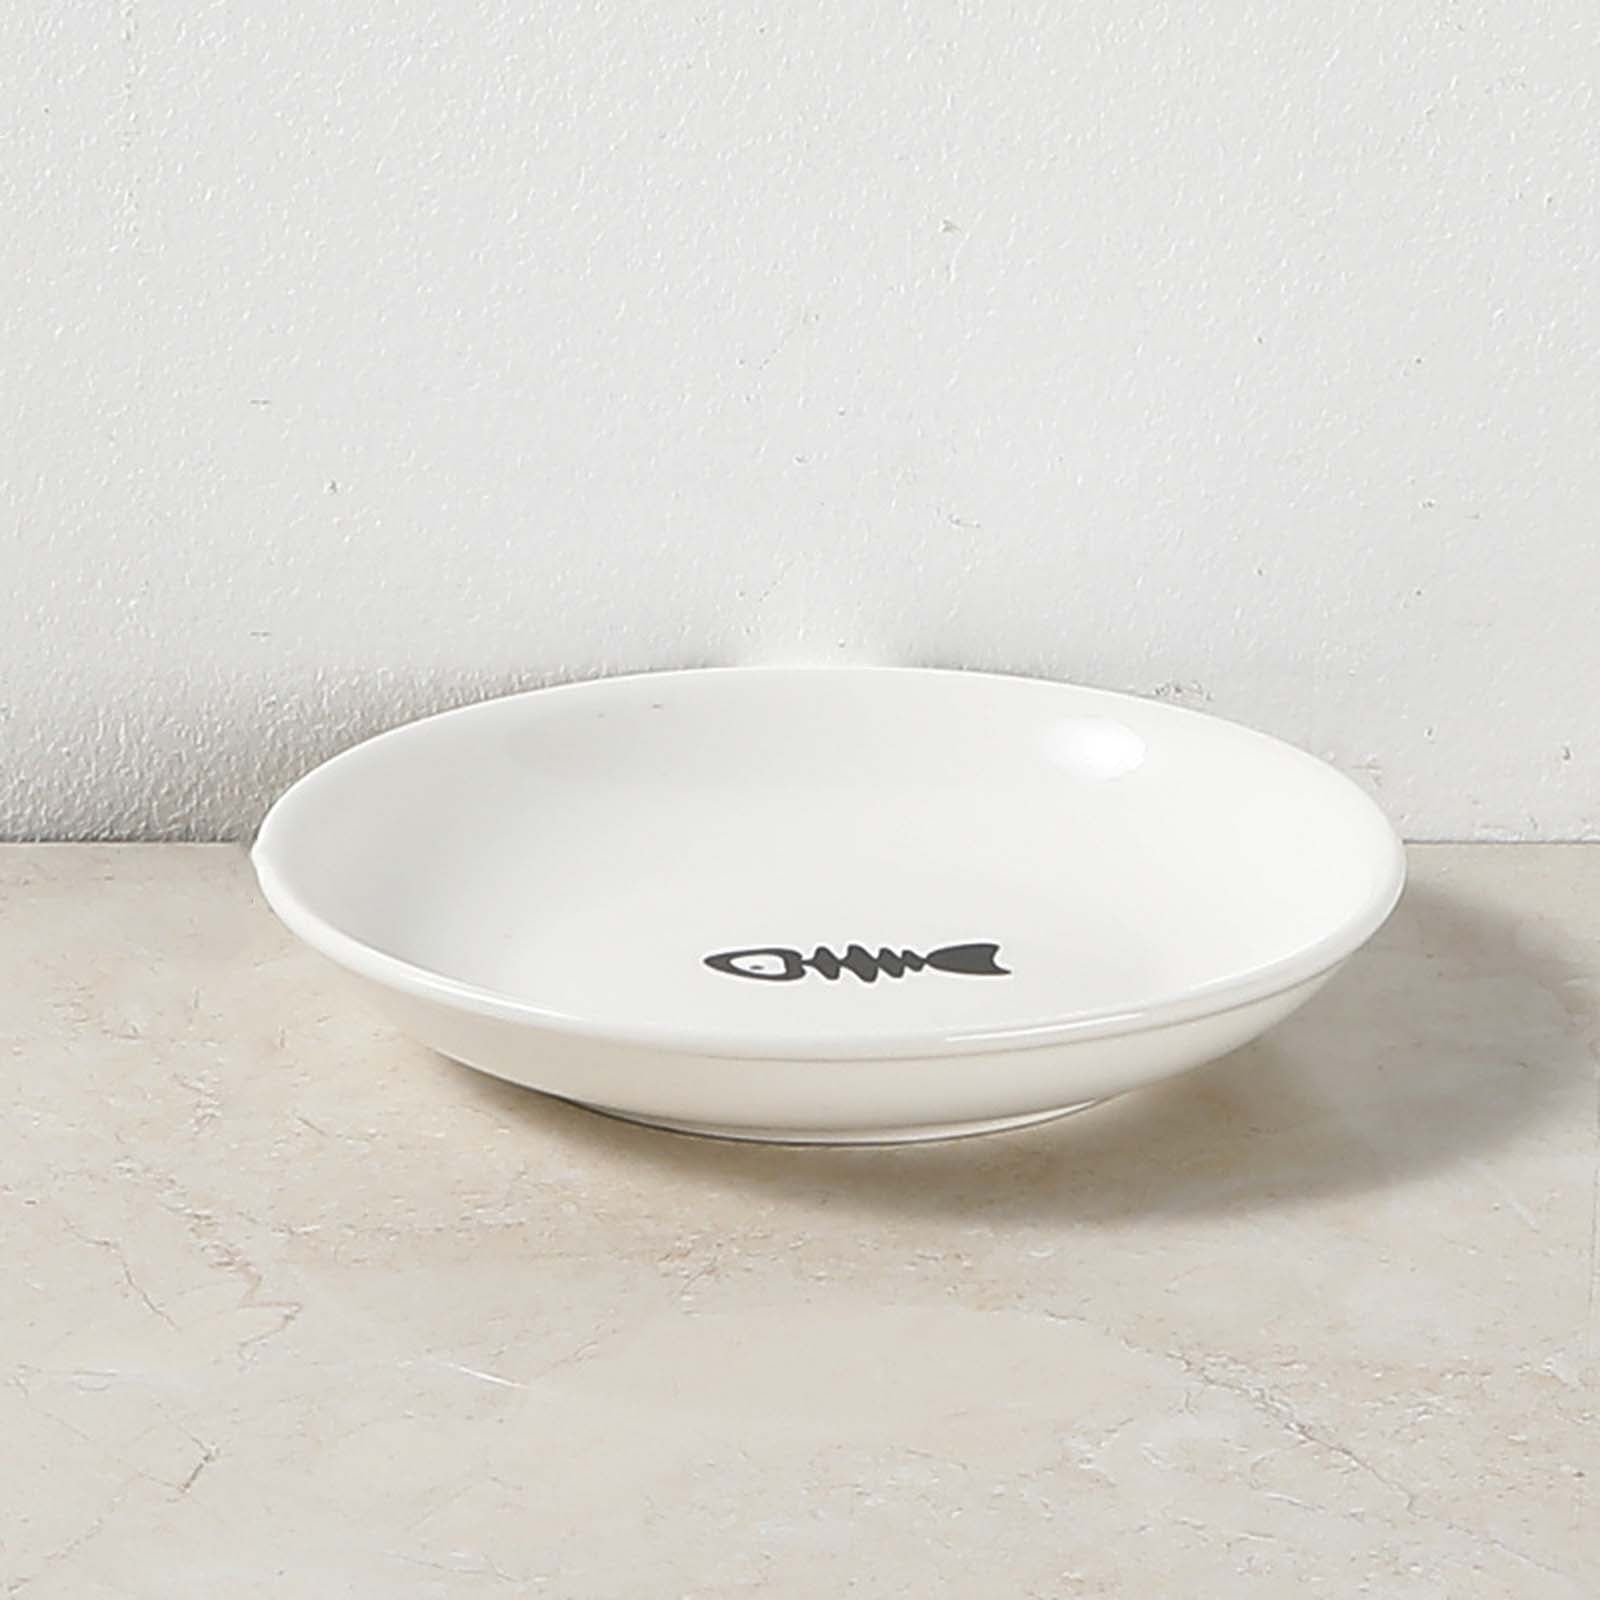 💲ONE DAY 70% OFF🥣Whisker-Friendly Anti-Vomit Cat Plate🔥Buy 2 Get Free Shipping